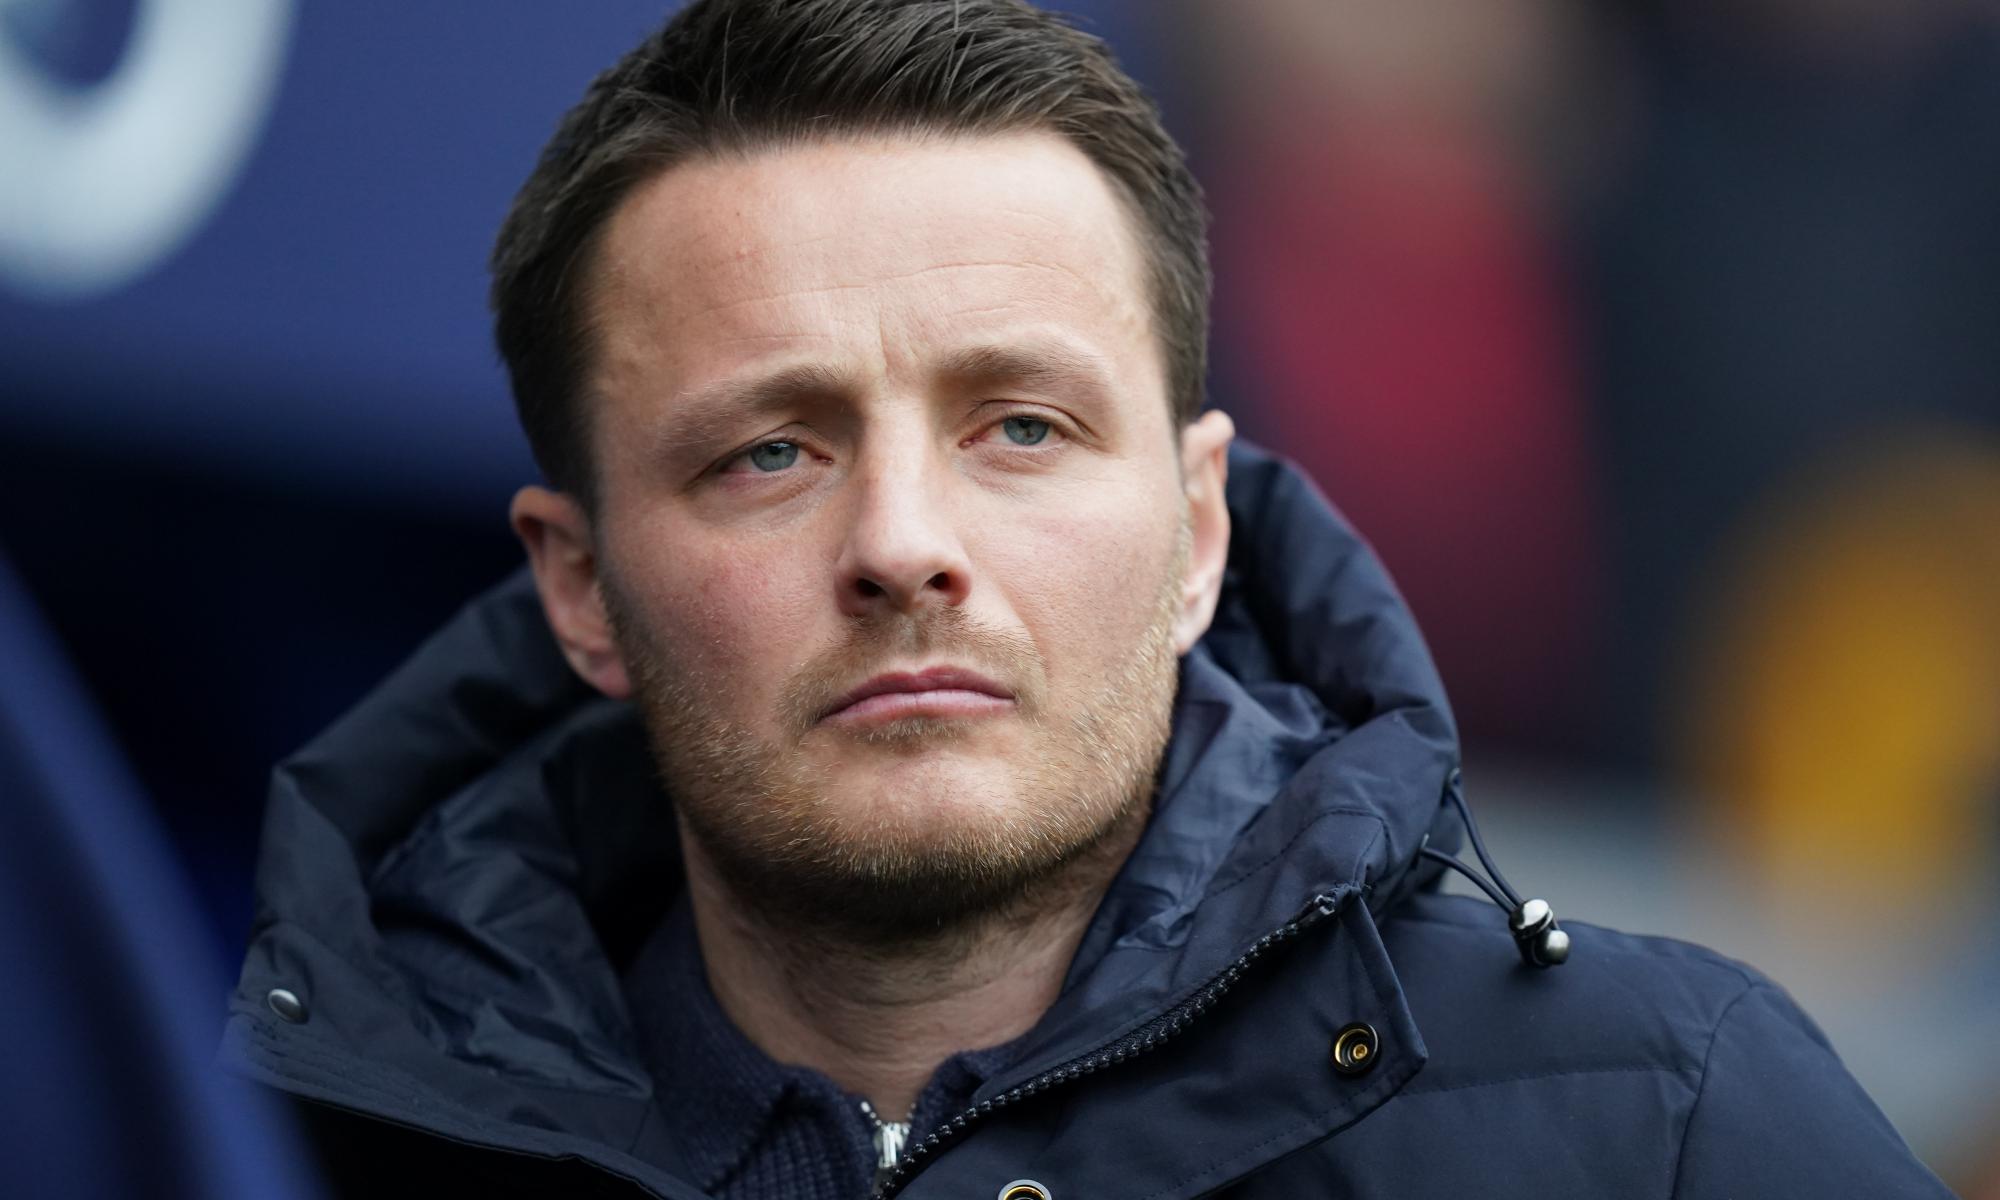 millwall sack edwards after 19 games with harris set to be approached